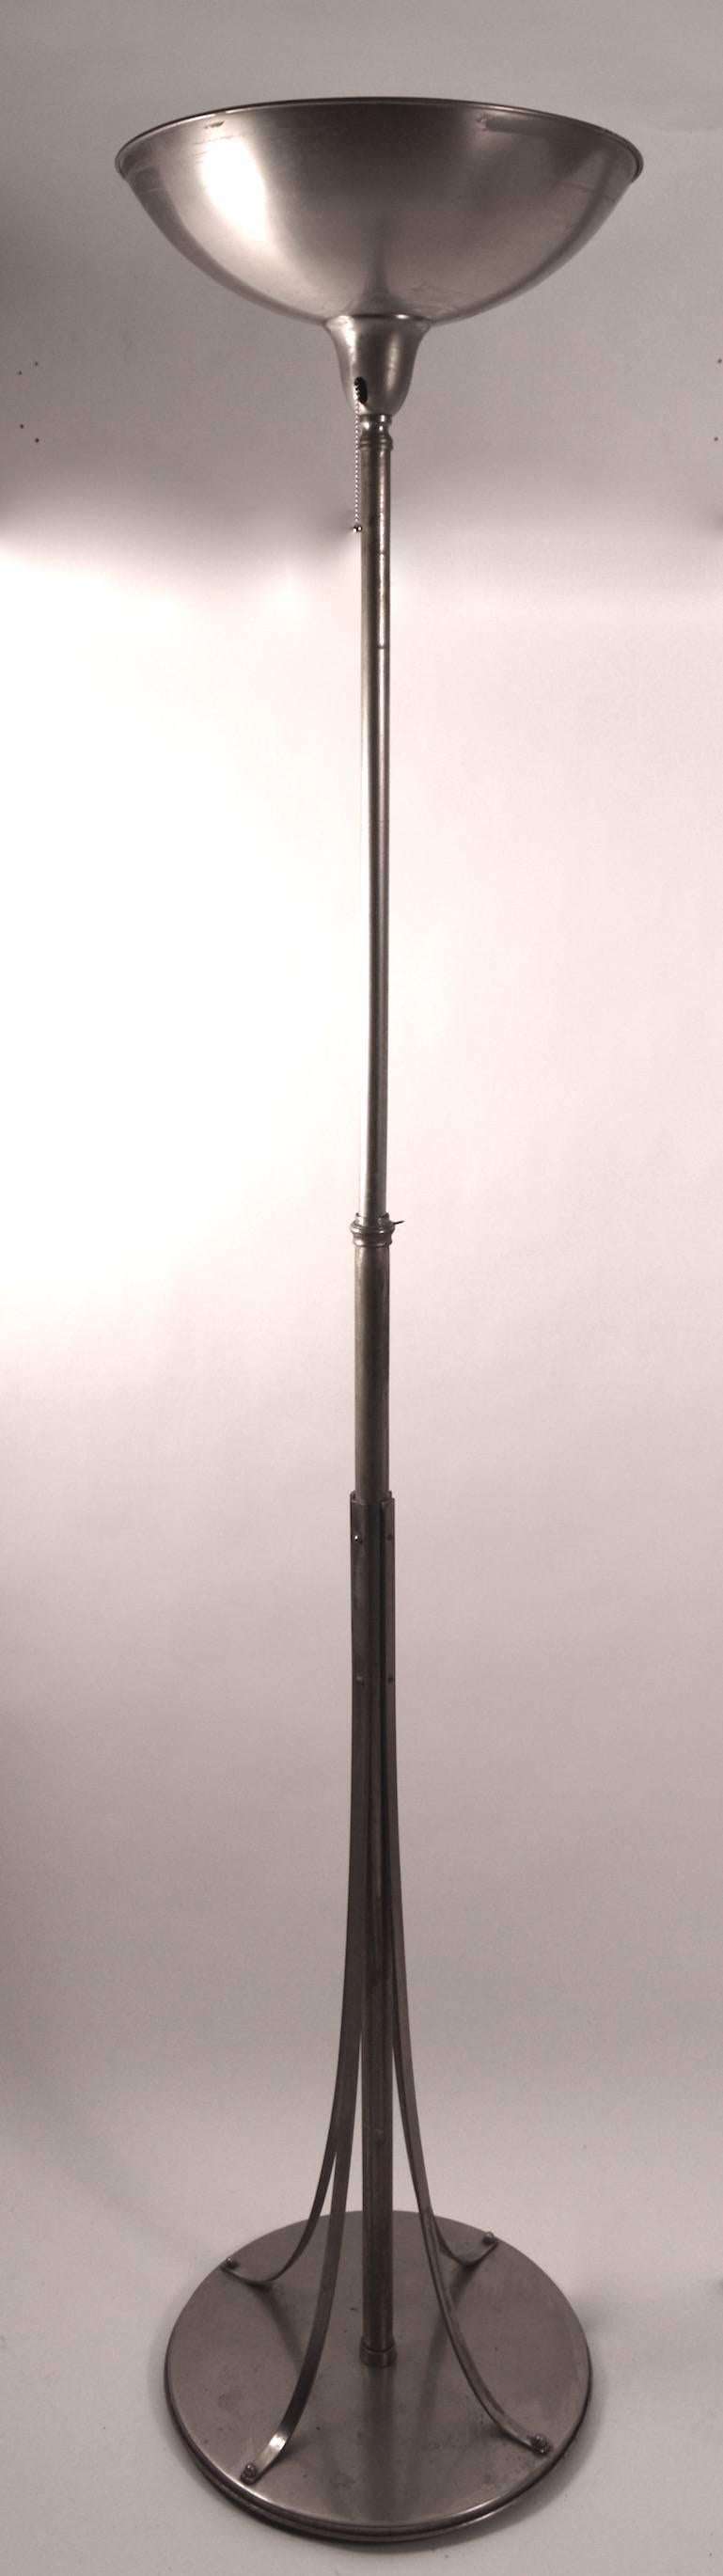 This Art Deco, Machine Age torchiere floor lamp was originally in the design office of the important and noted designer, artist Hugo Gnam, in fact he designed this lamp himself for his own personal use. The lamp is adjustable in height, highest 88